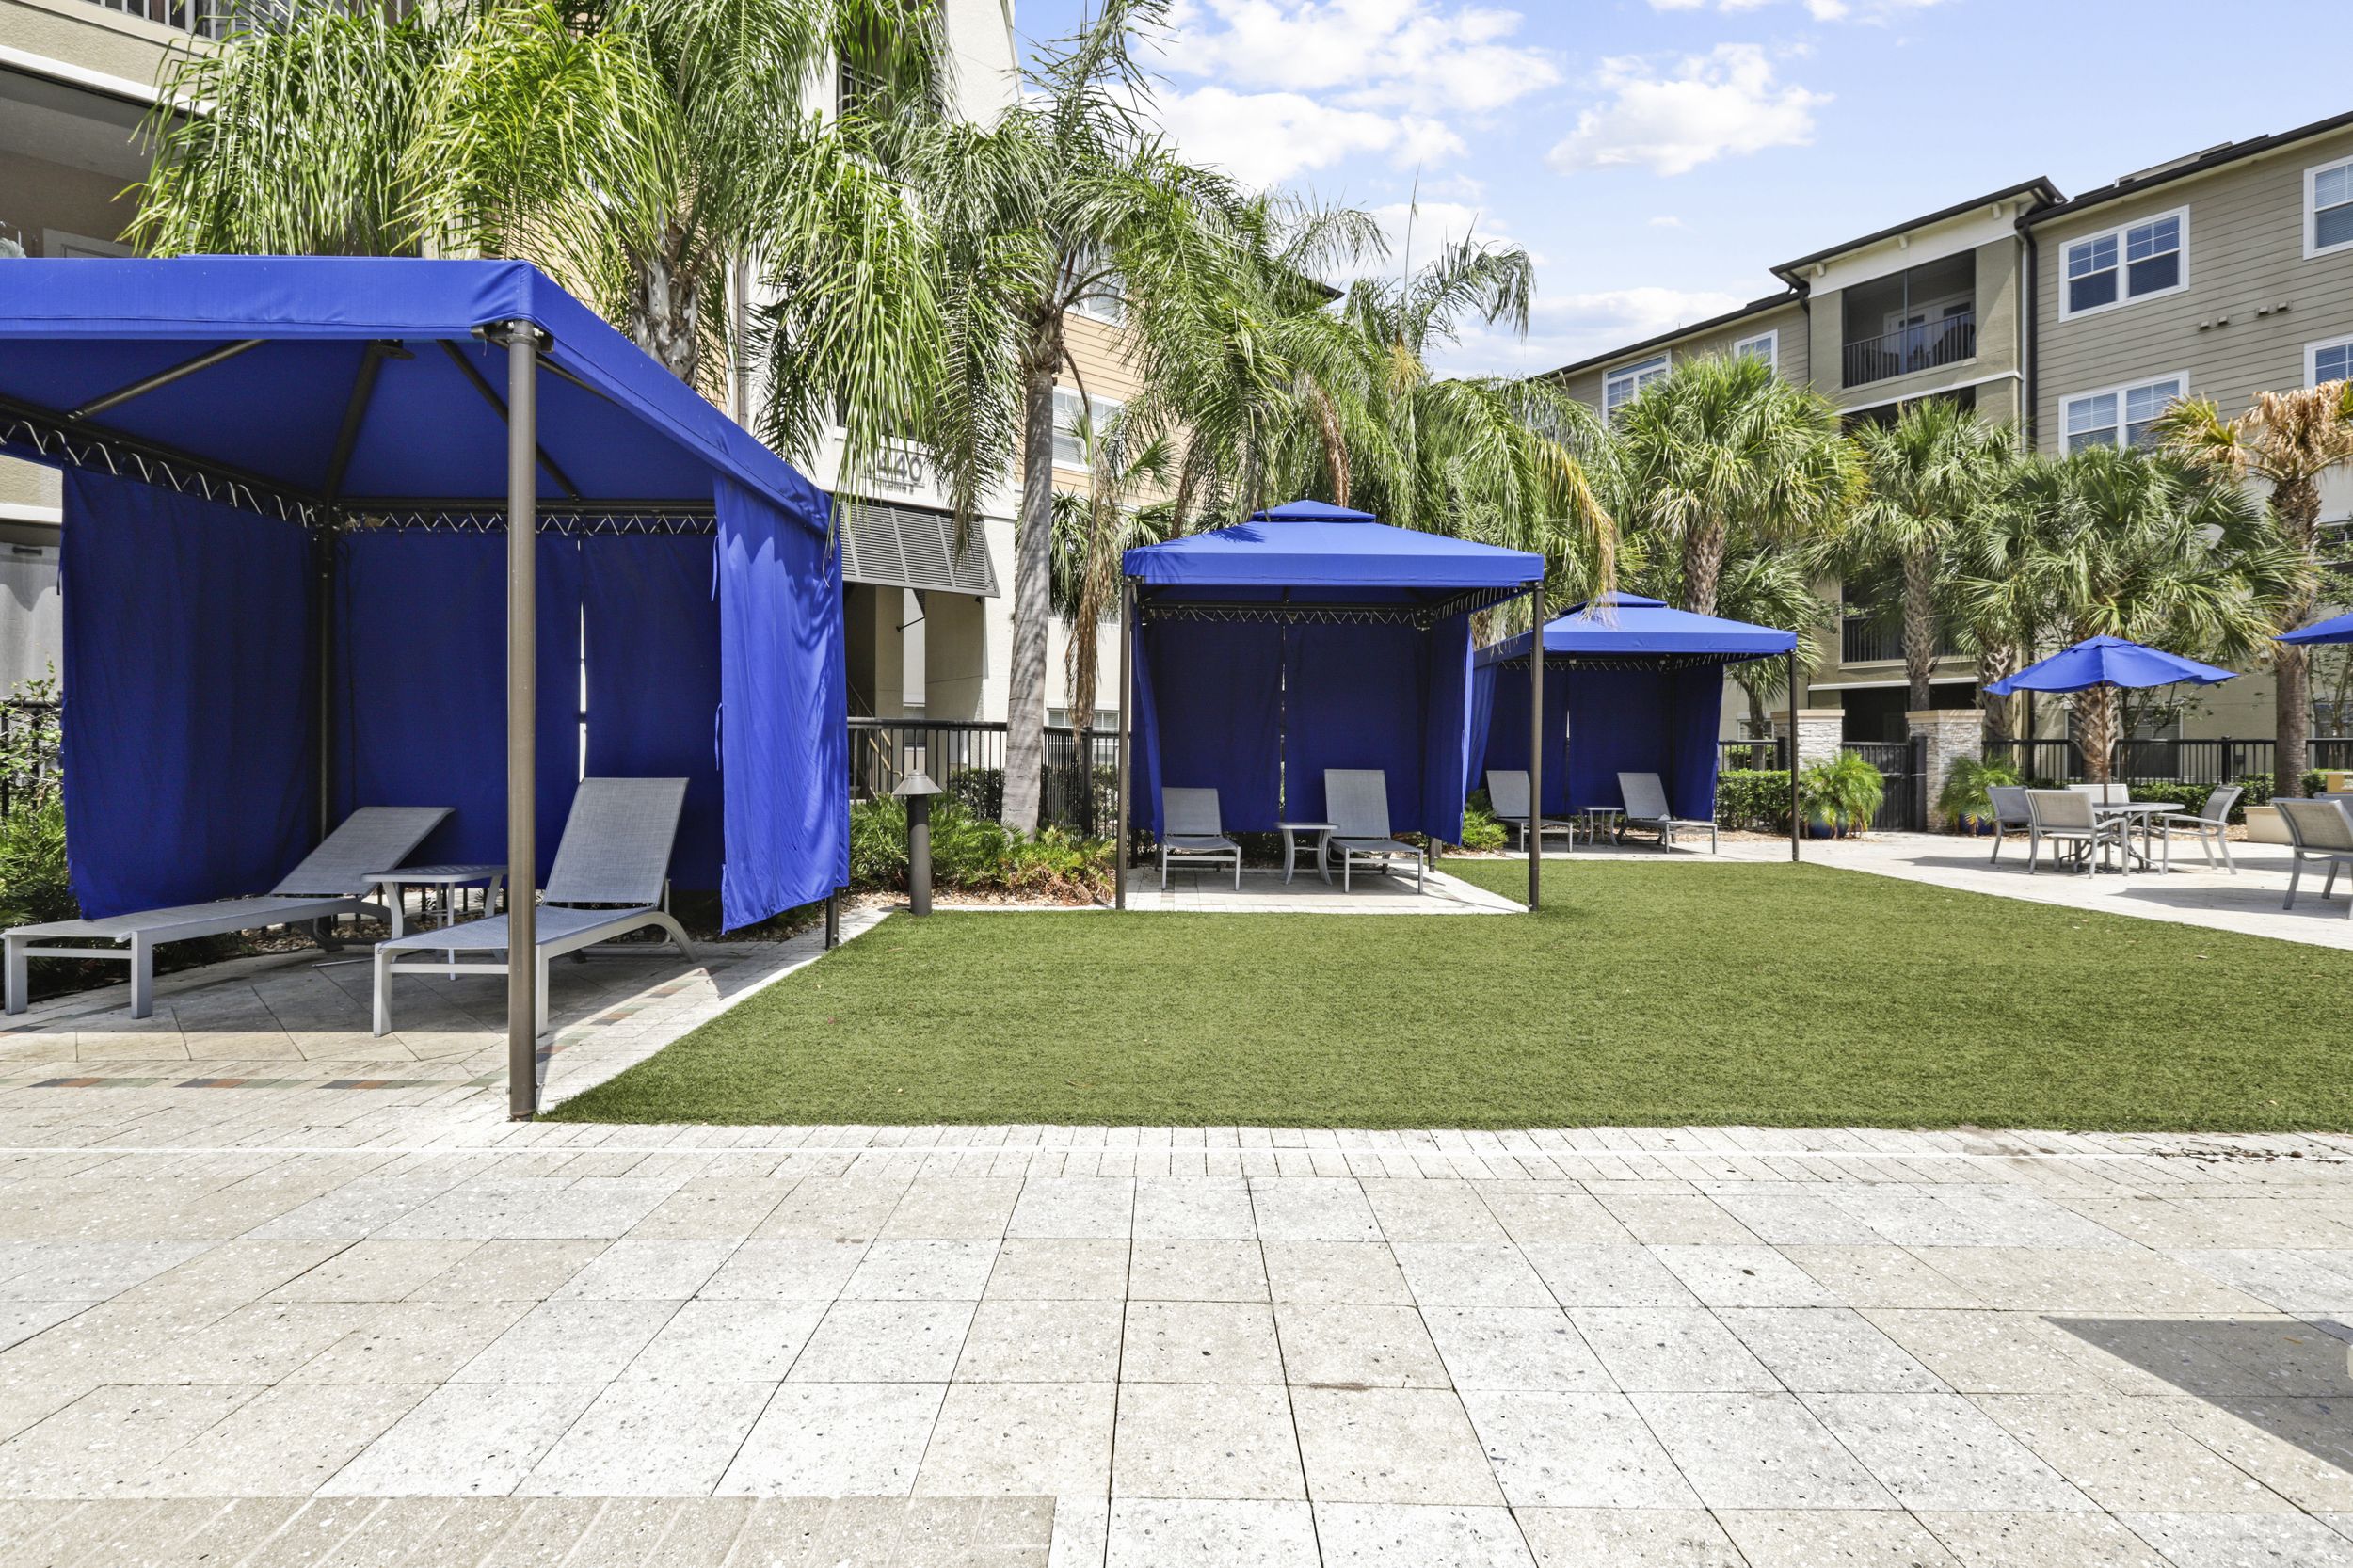 Poolside Cabanas with Summer Kitchen and Hammock Hang Out at Lantower Brandon Crossroads Apartments.